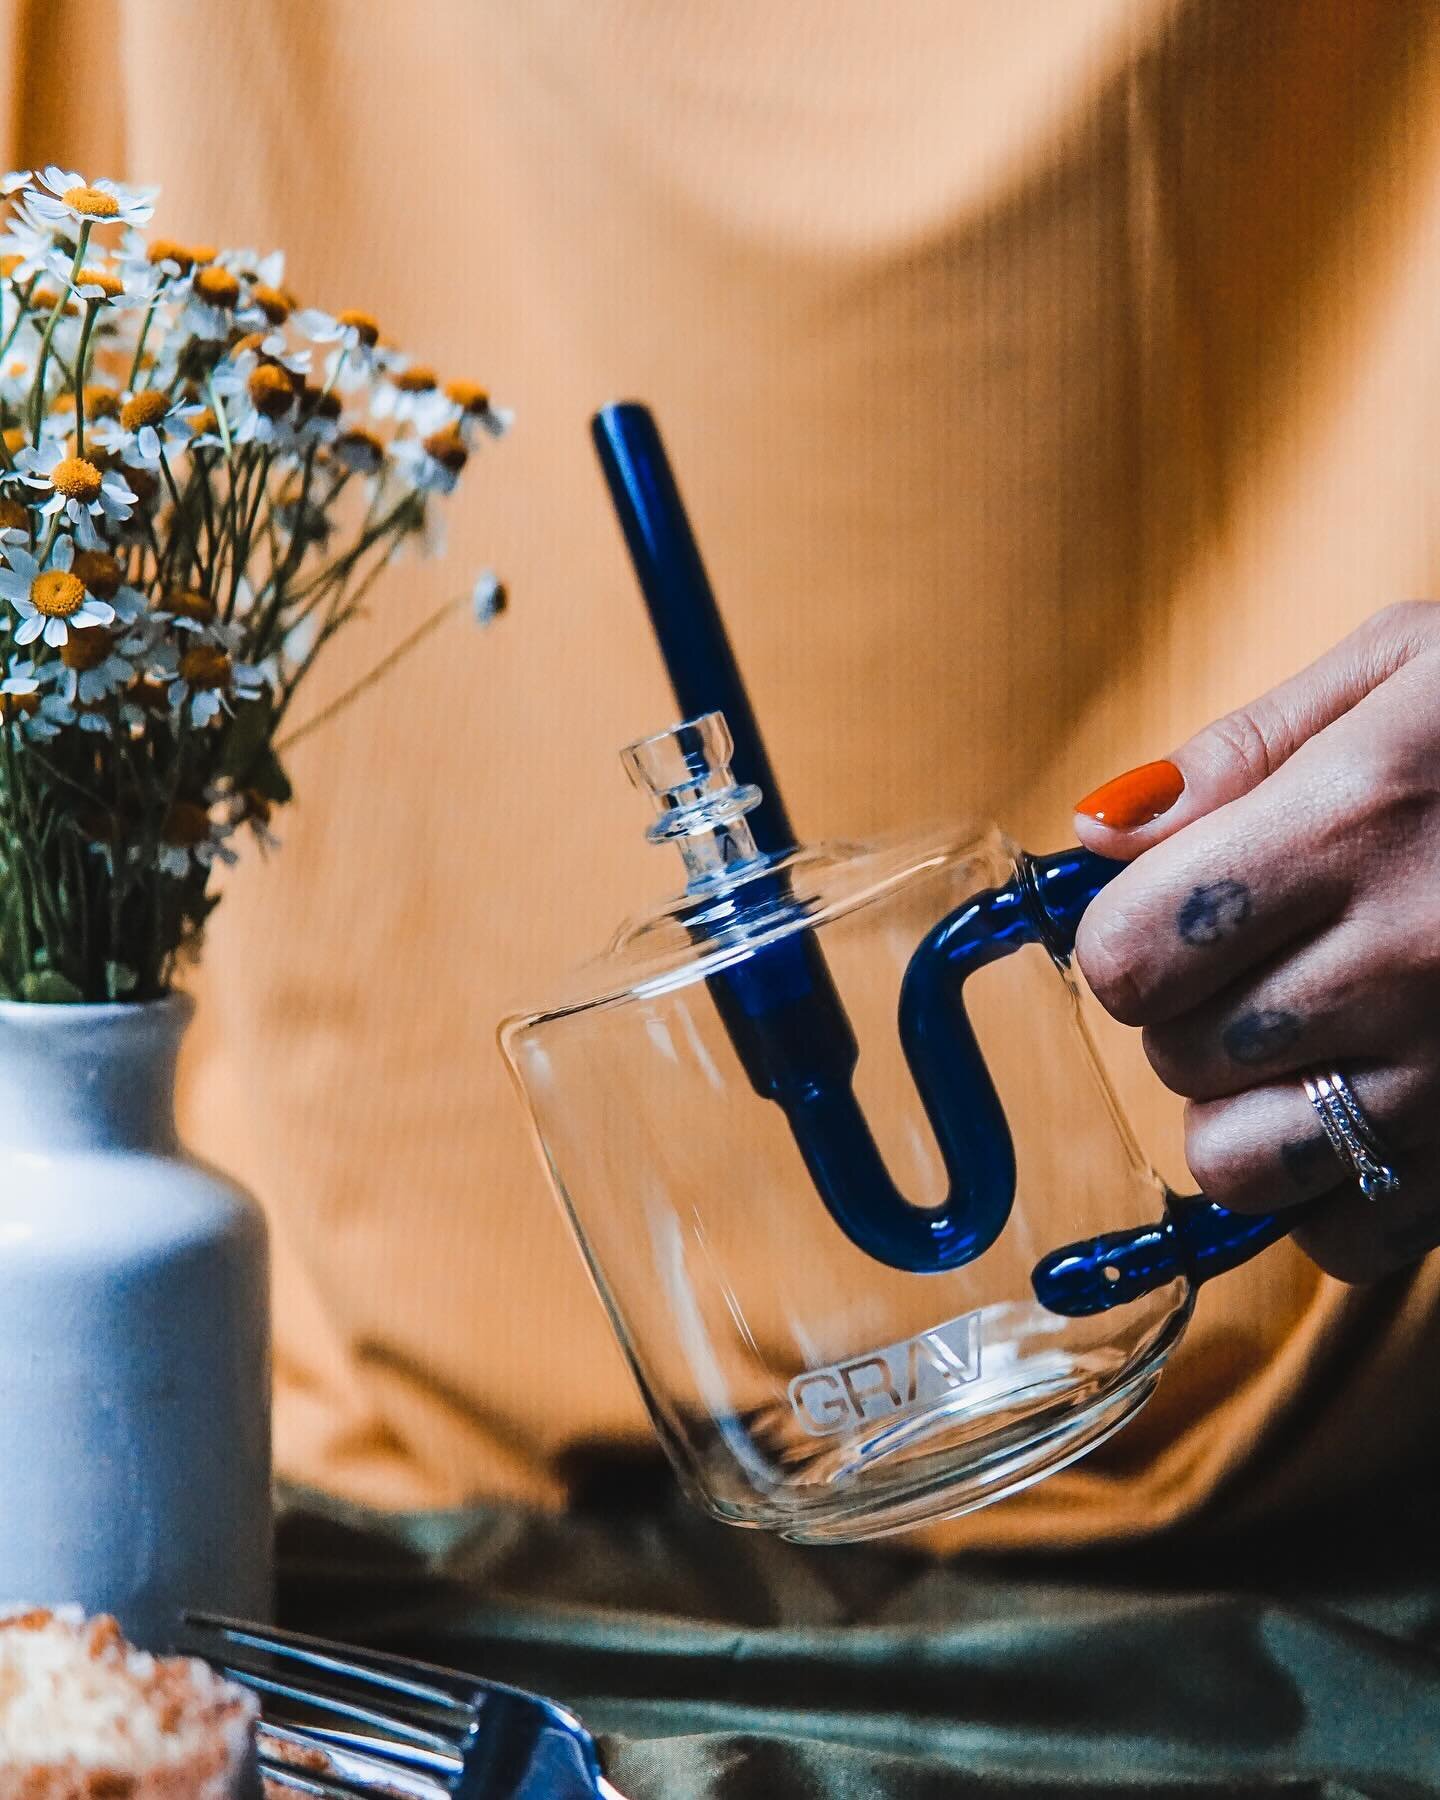 Nothing pairs better with breakfast than the GRAV Coffee Mug Bubbler.

ALL COLOURS NOW IN STOCK

Shop now via the link in our bio.

Photo by courtesy of @gravlabs

#bongs #pipes #vaporizers #grav #apollo #apollodispensary #australia